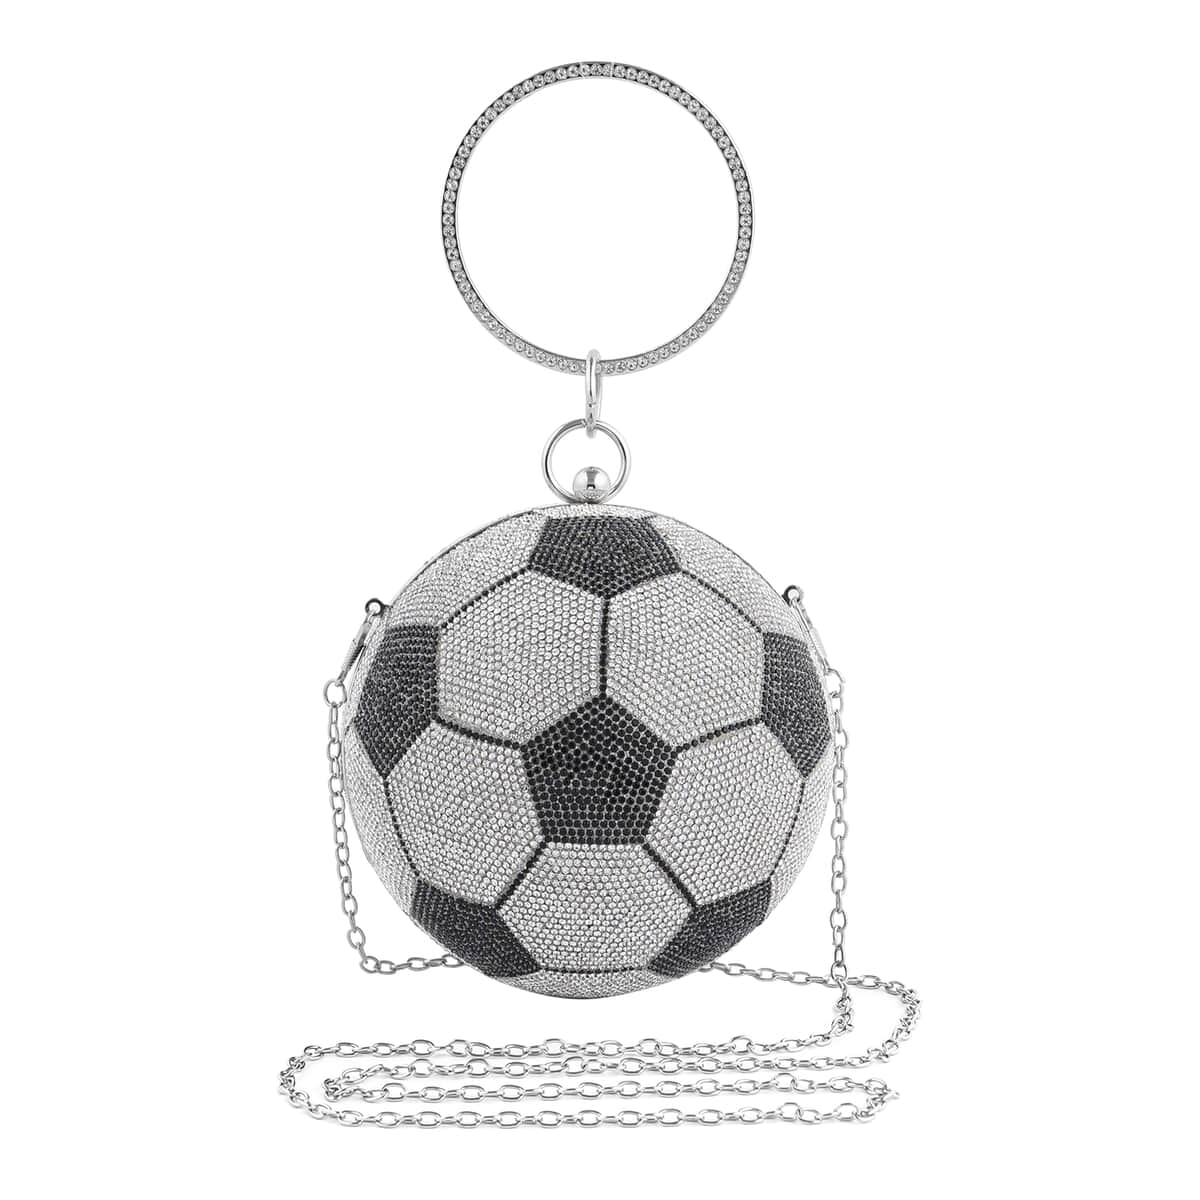 Black & White Crystal Basketball Shape Clutch Bag (D 5.5") wih Chain (47") and Hand Drop (3.25") image number 0